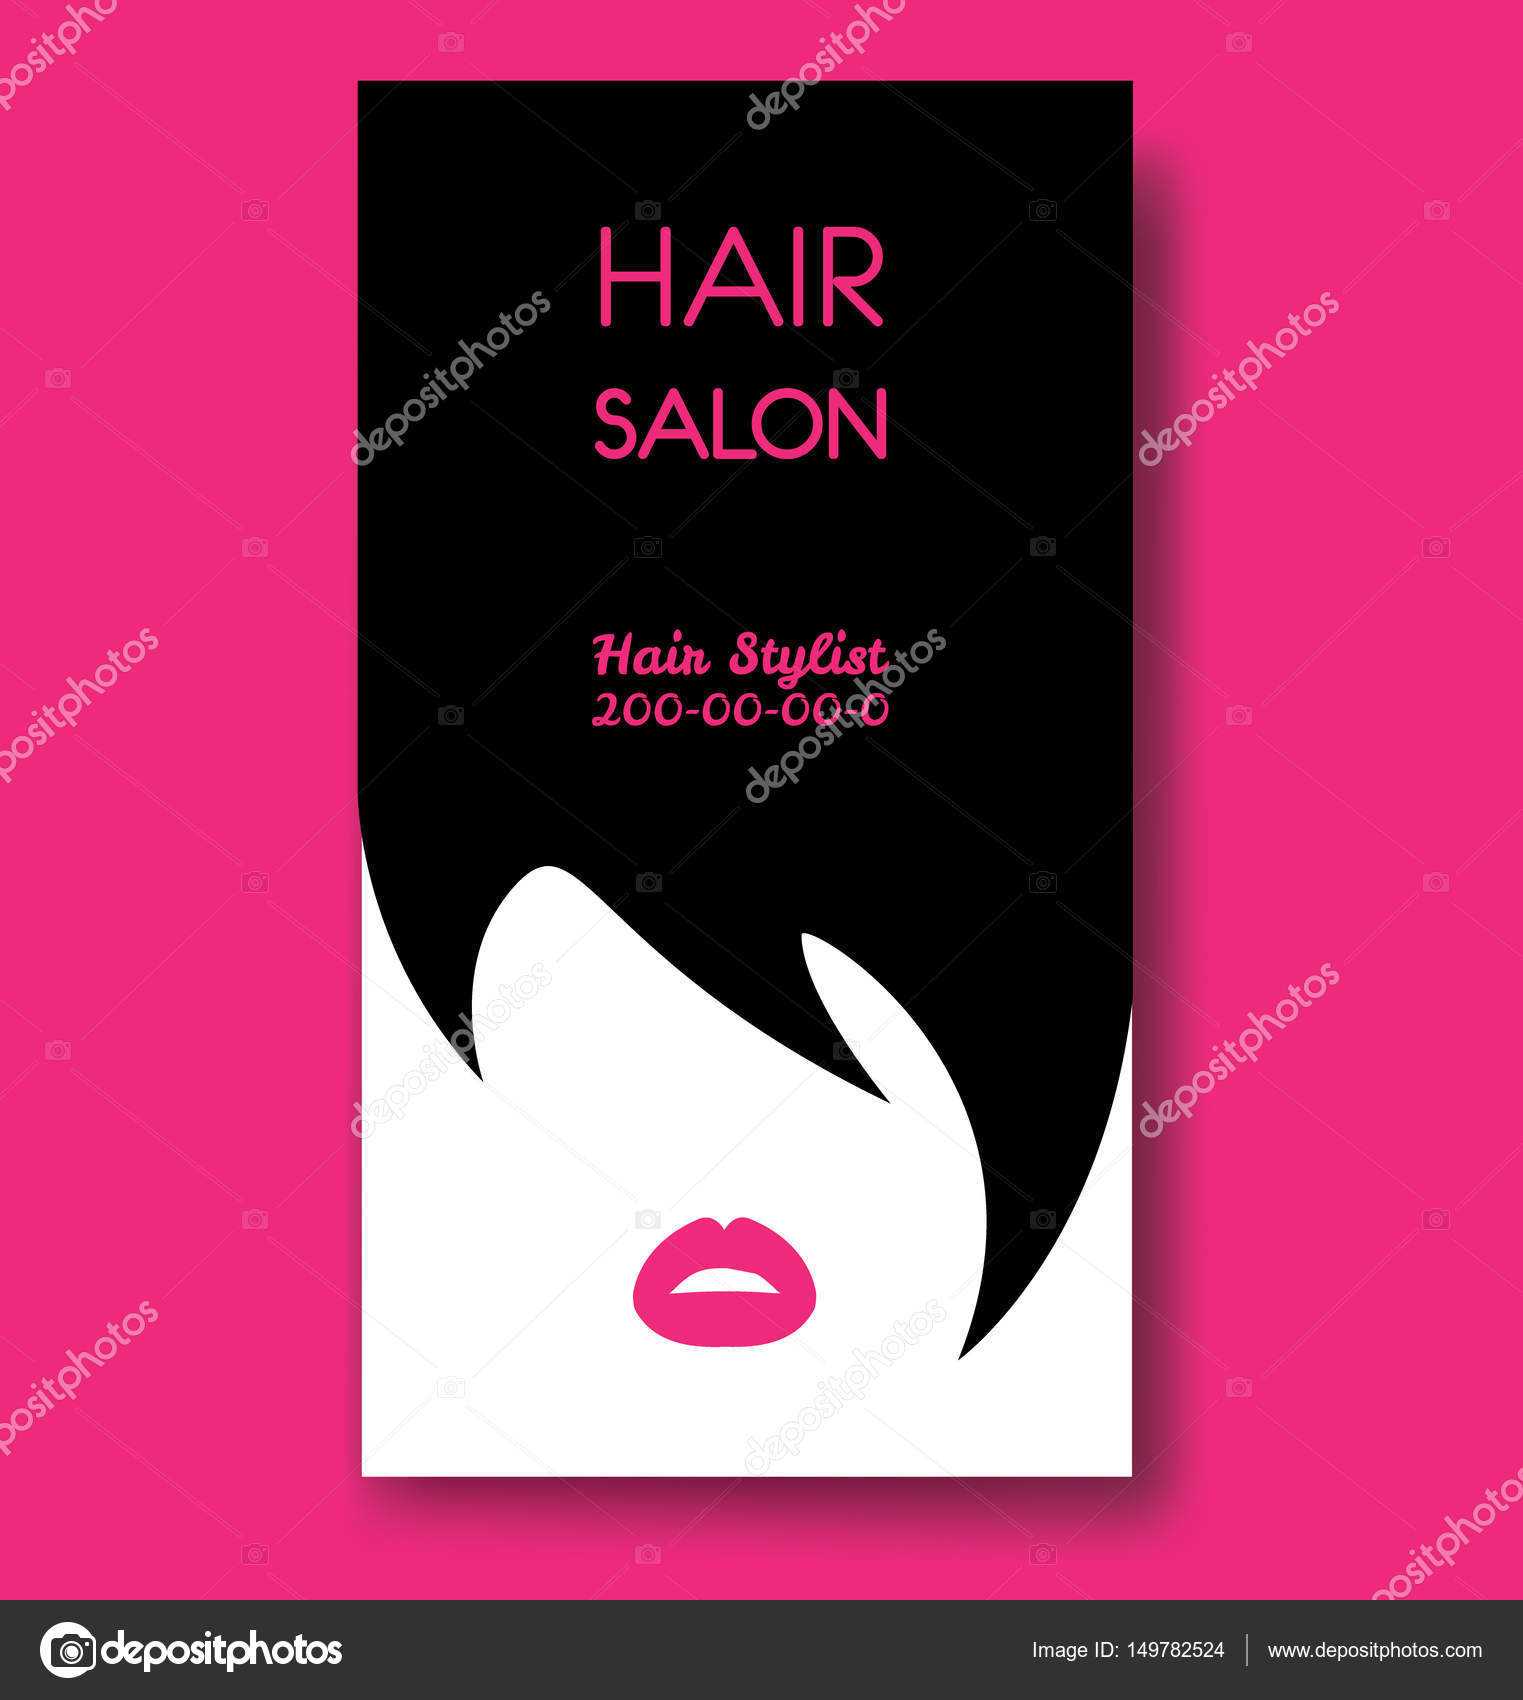 Hair Stylist Business Cards Examples | Hair Salon Business Pertaining To Hair Salon Business Card Template